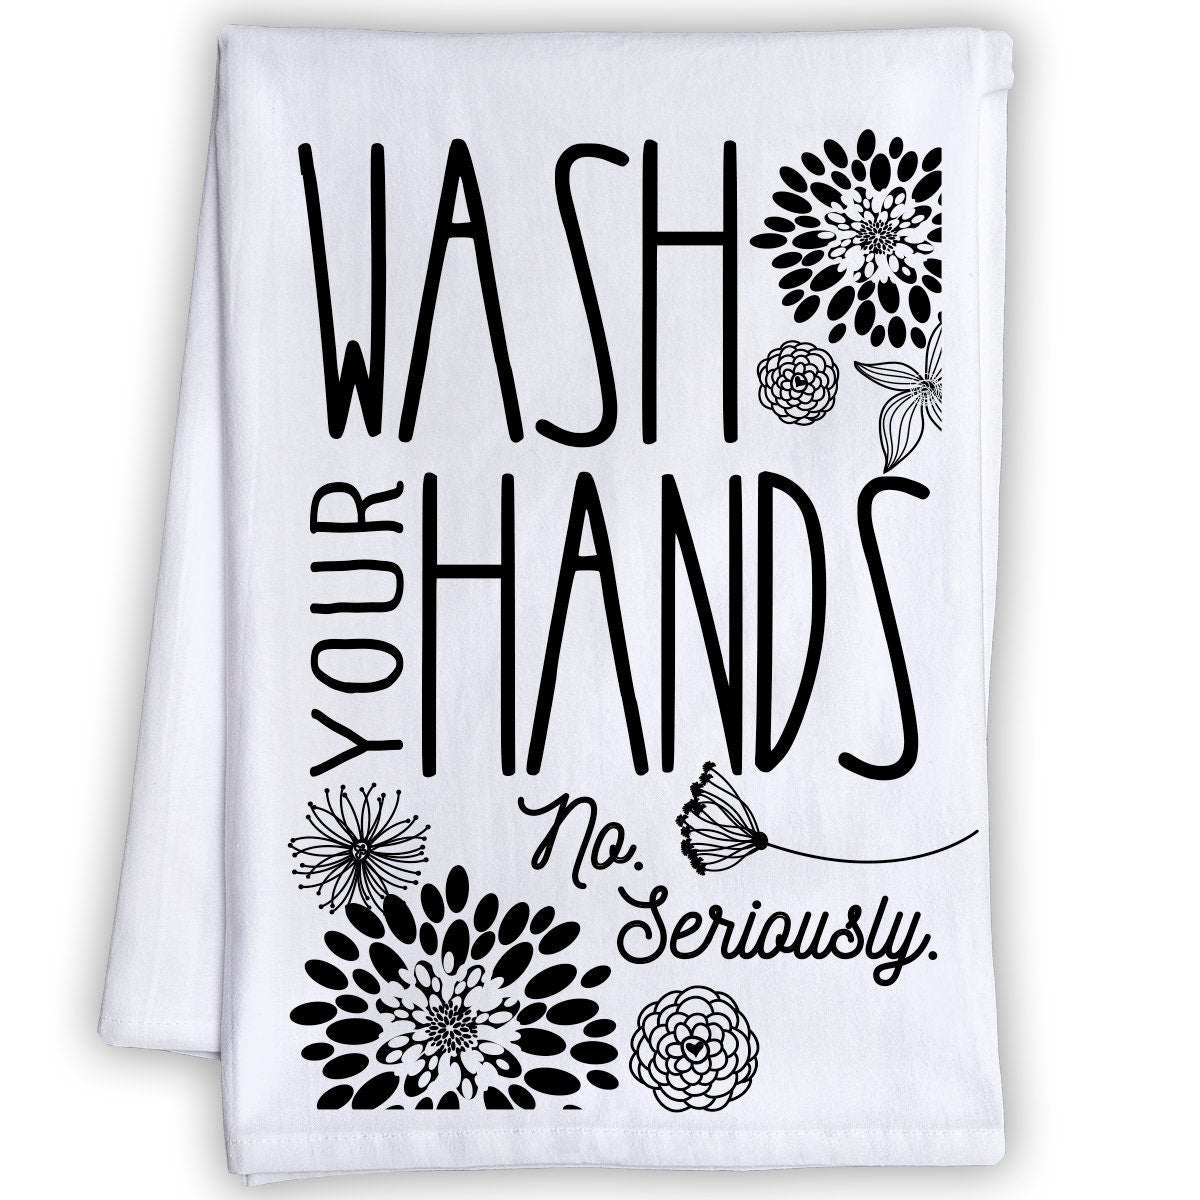 Funny Kitchen Tea Towels - Wash Your Hands Seriously - Humorous Flour Sack Dish Towel - Great Housewarming Gift and Kitchen Decor Lone Star Art 